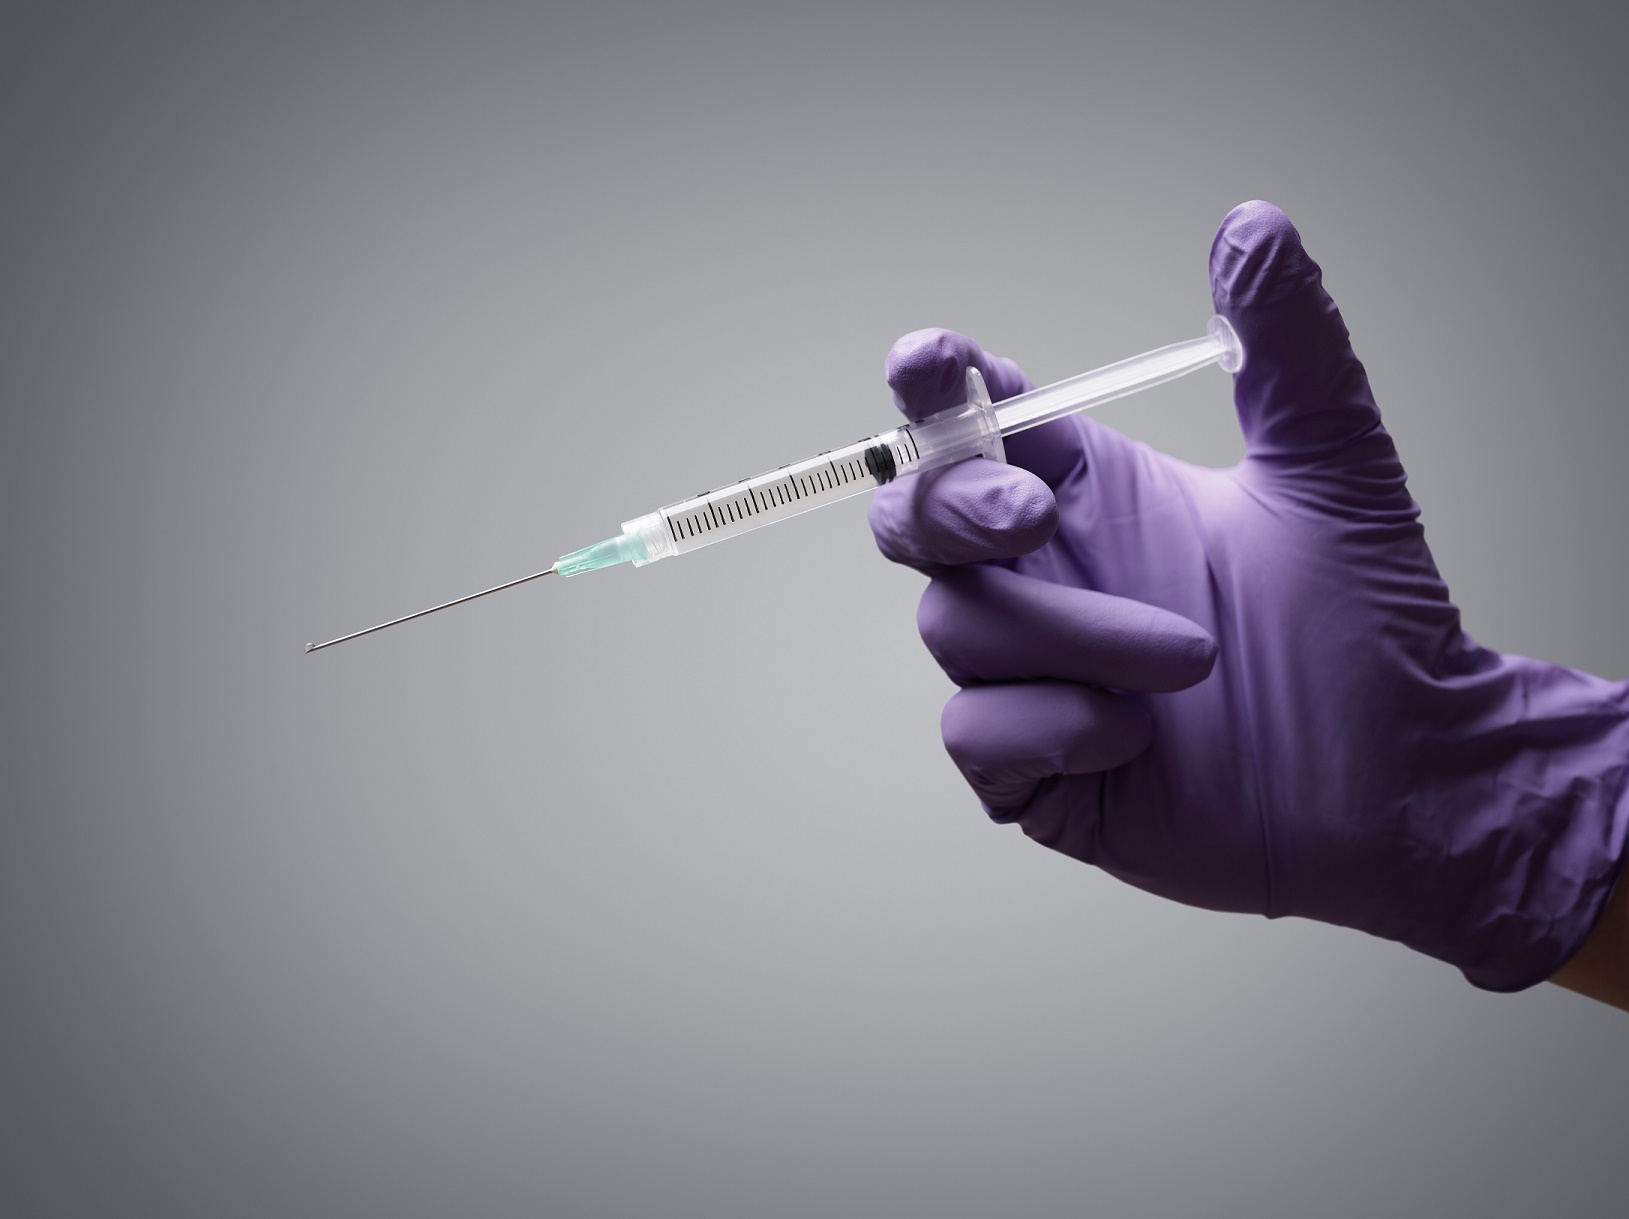 Advanced technology brings us closer to needleless vaccines